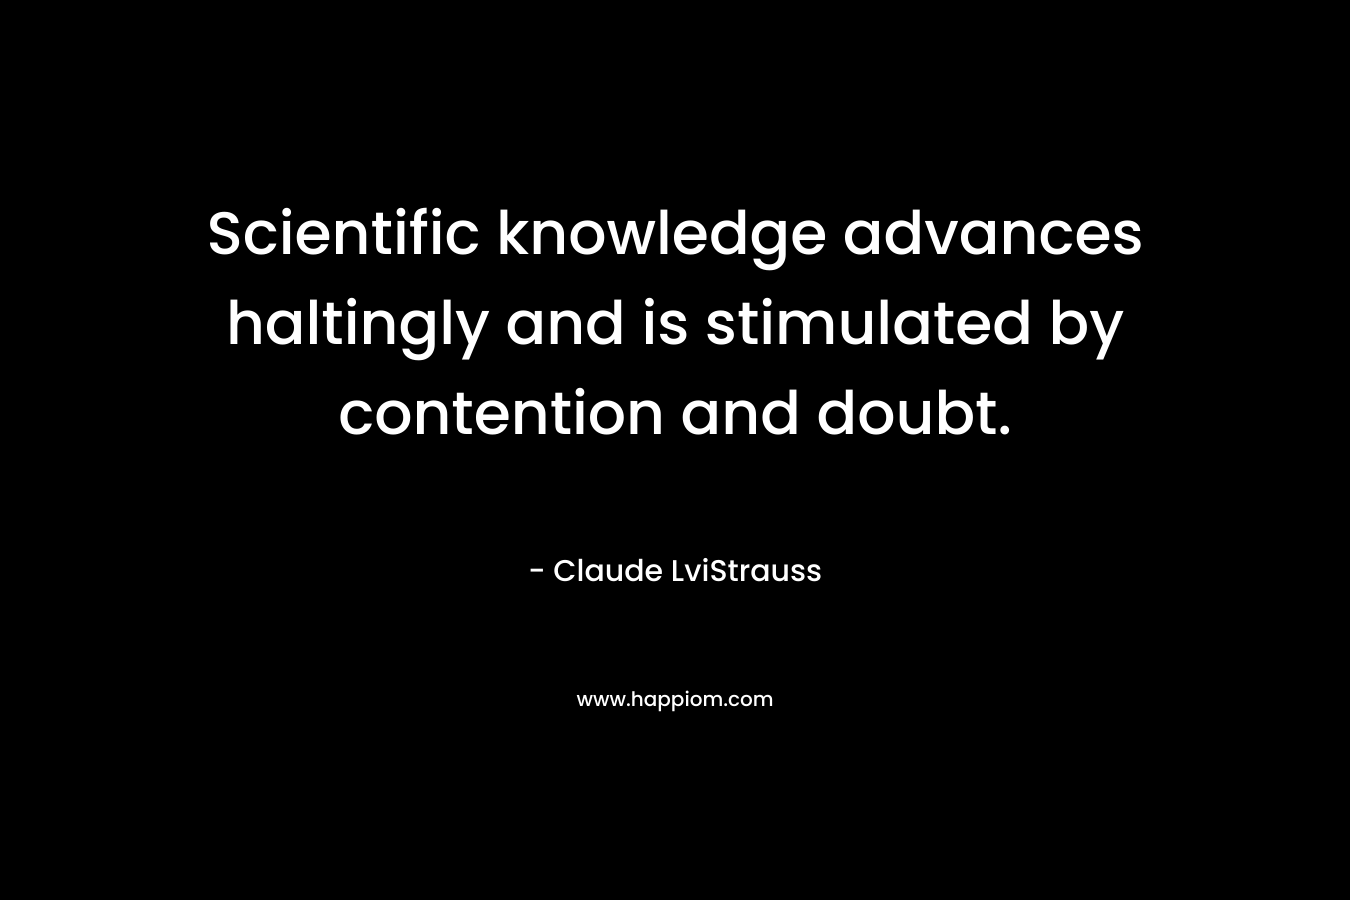 Scientific knowledge advances haltingly and is stimulated by contention and doubt.